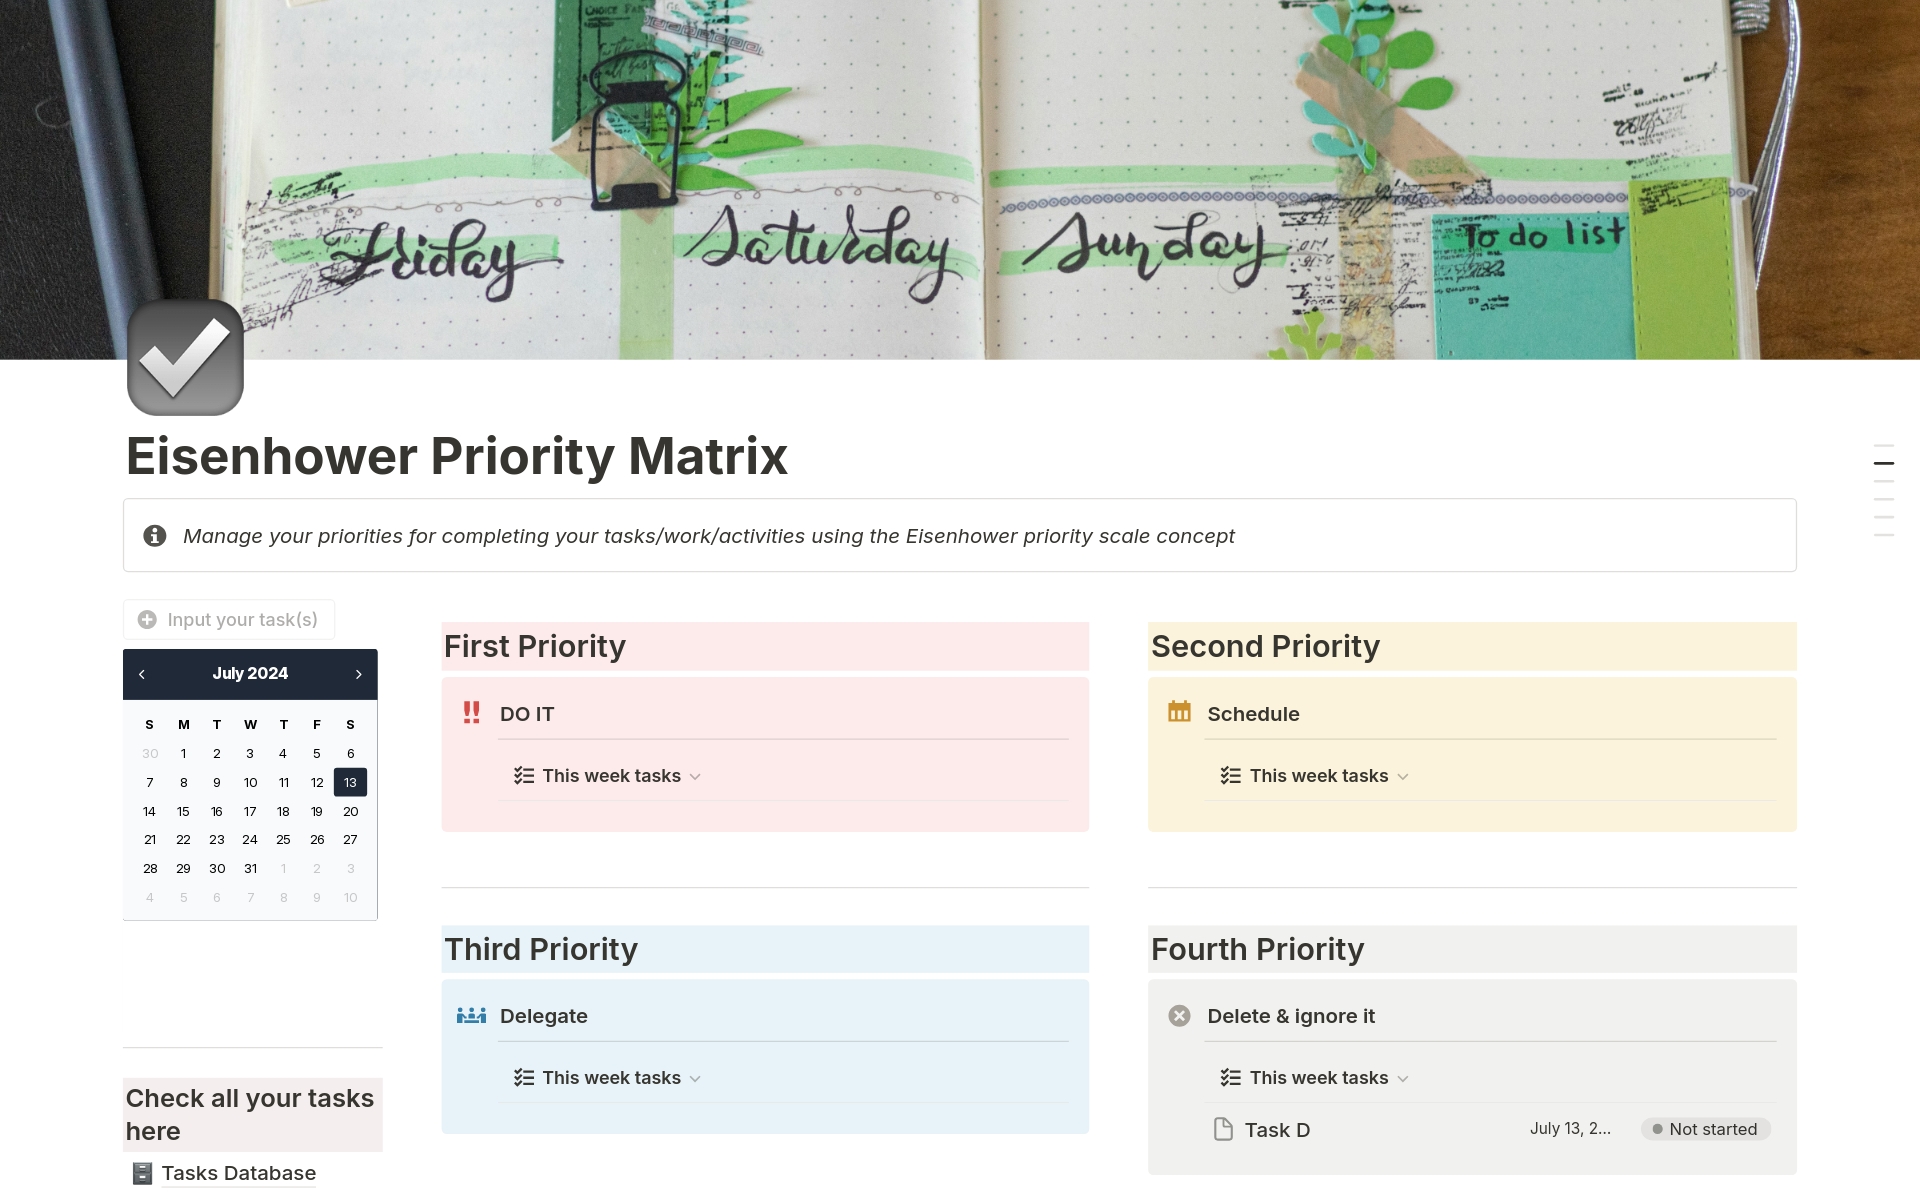 Manage your priorities for completing your tasks/work/activities using the Eisenhower priority scale concept